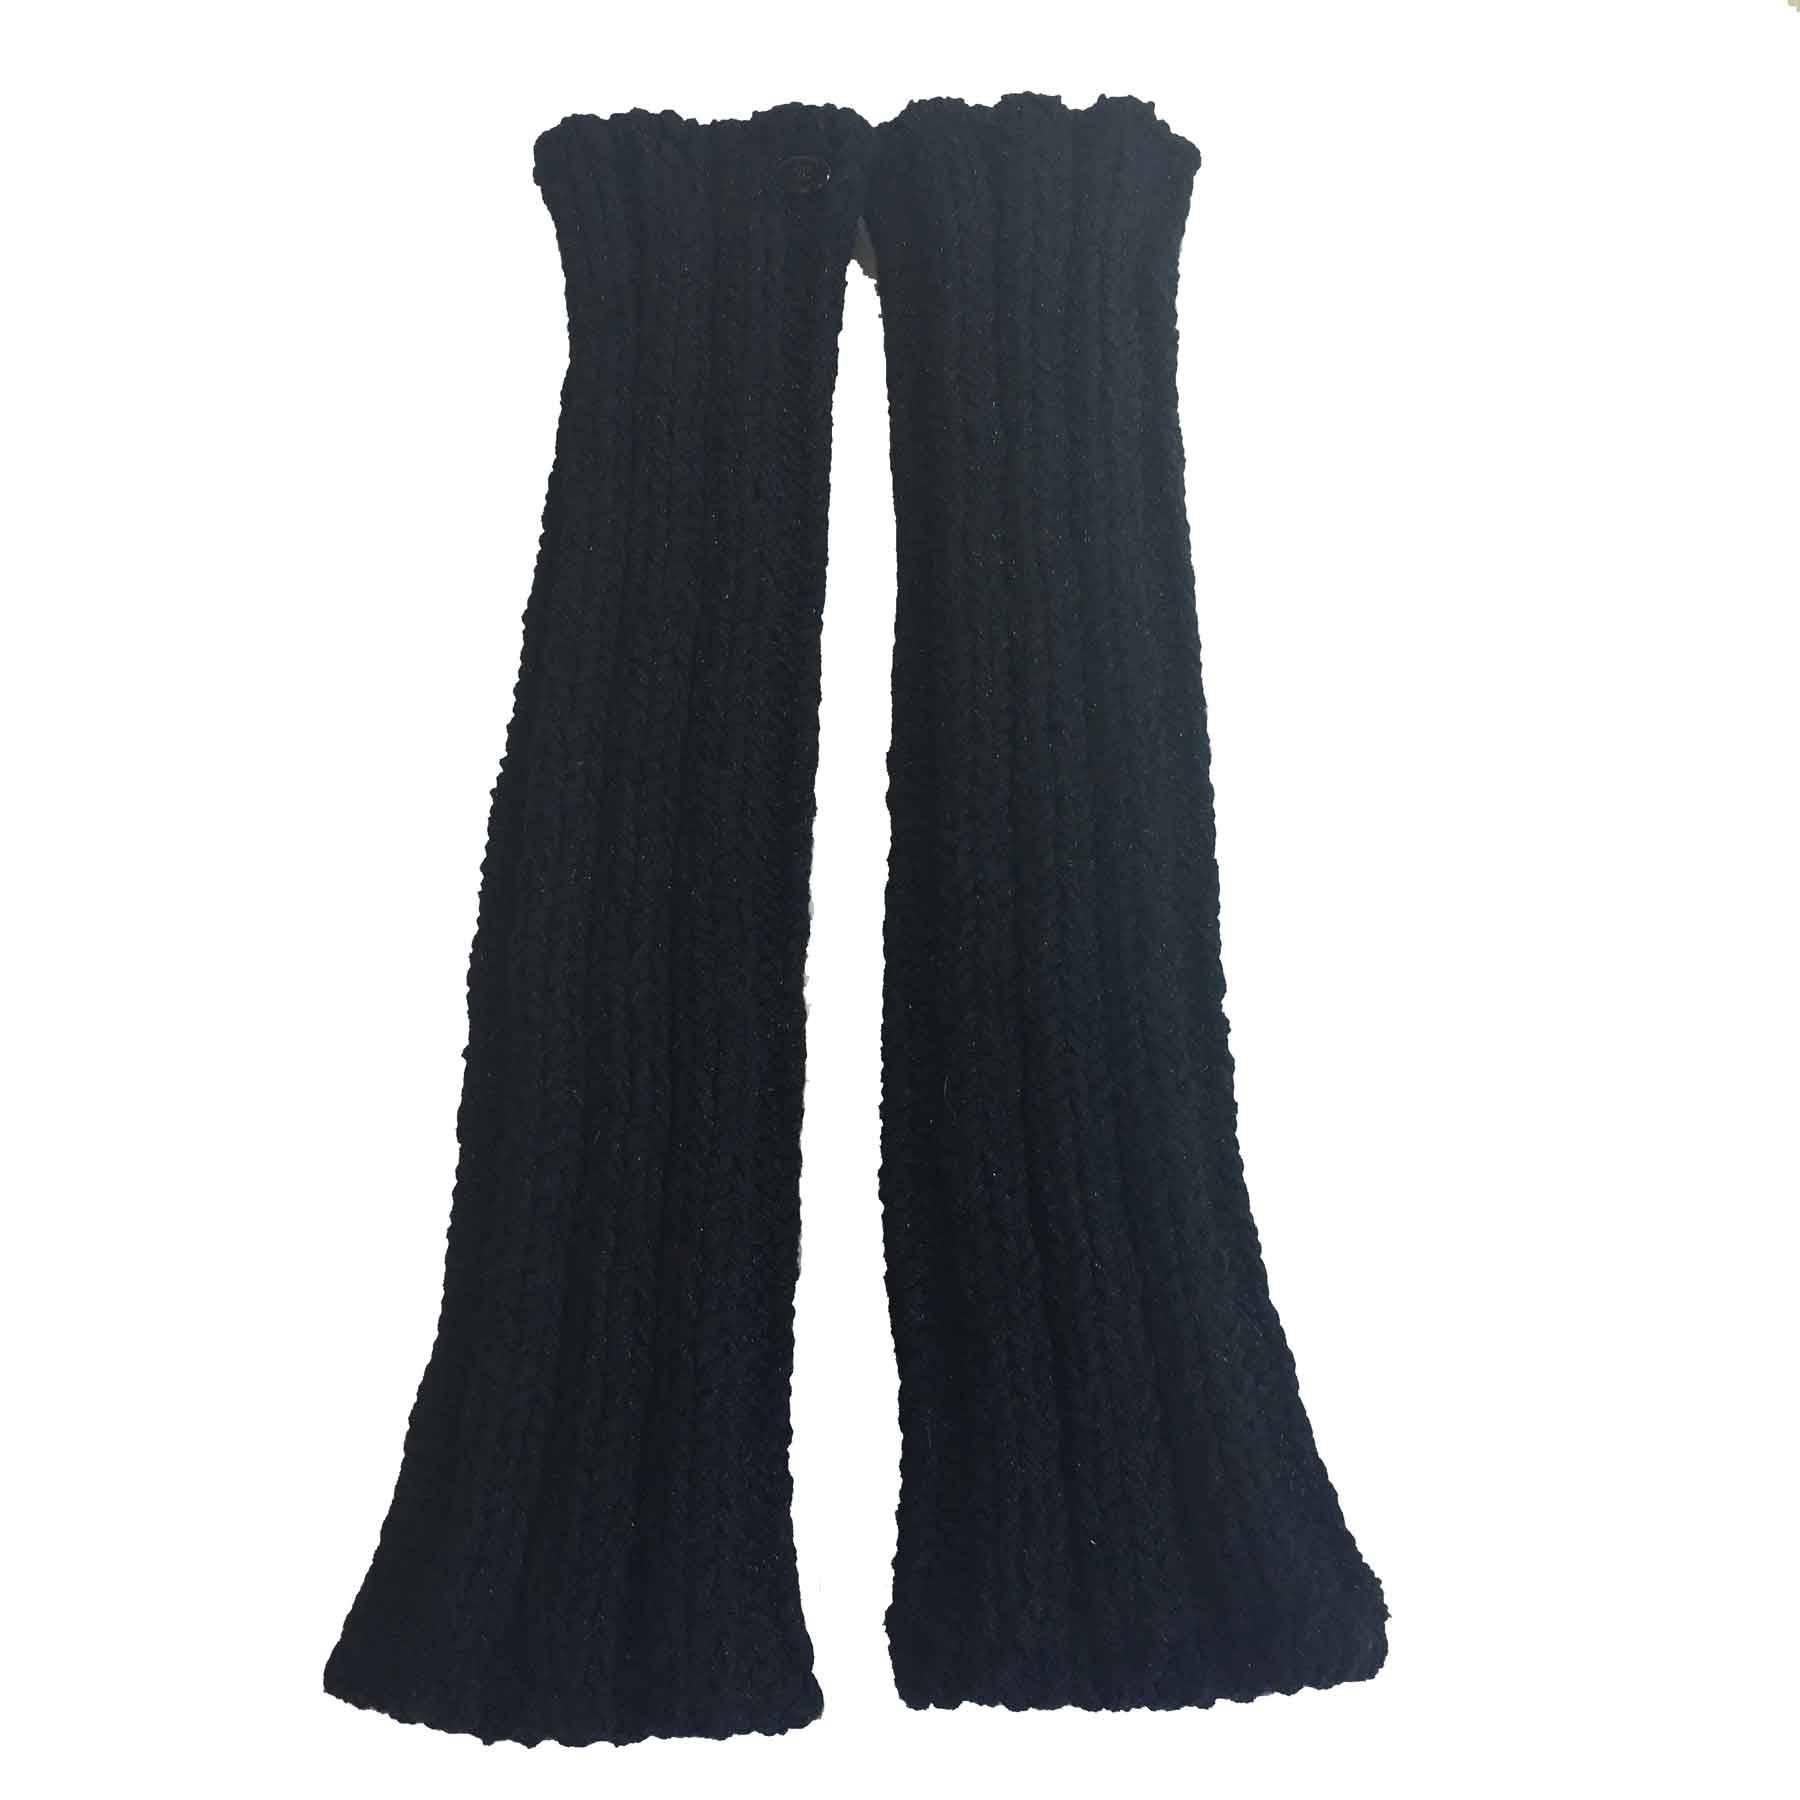 CHANEL Long Knitted Mittens in Black Cotton, Cashmere and Silk Size 2 For Sale